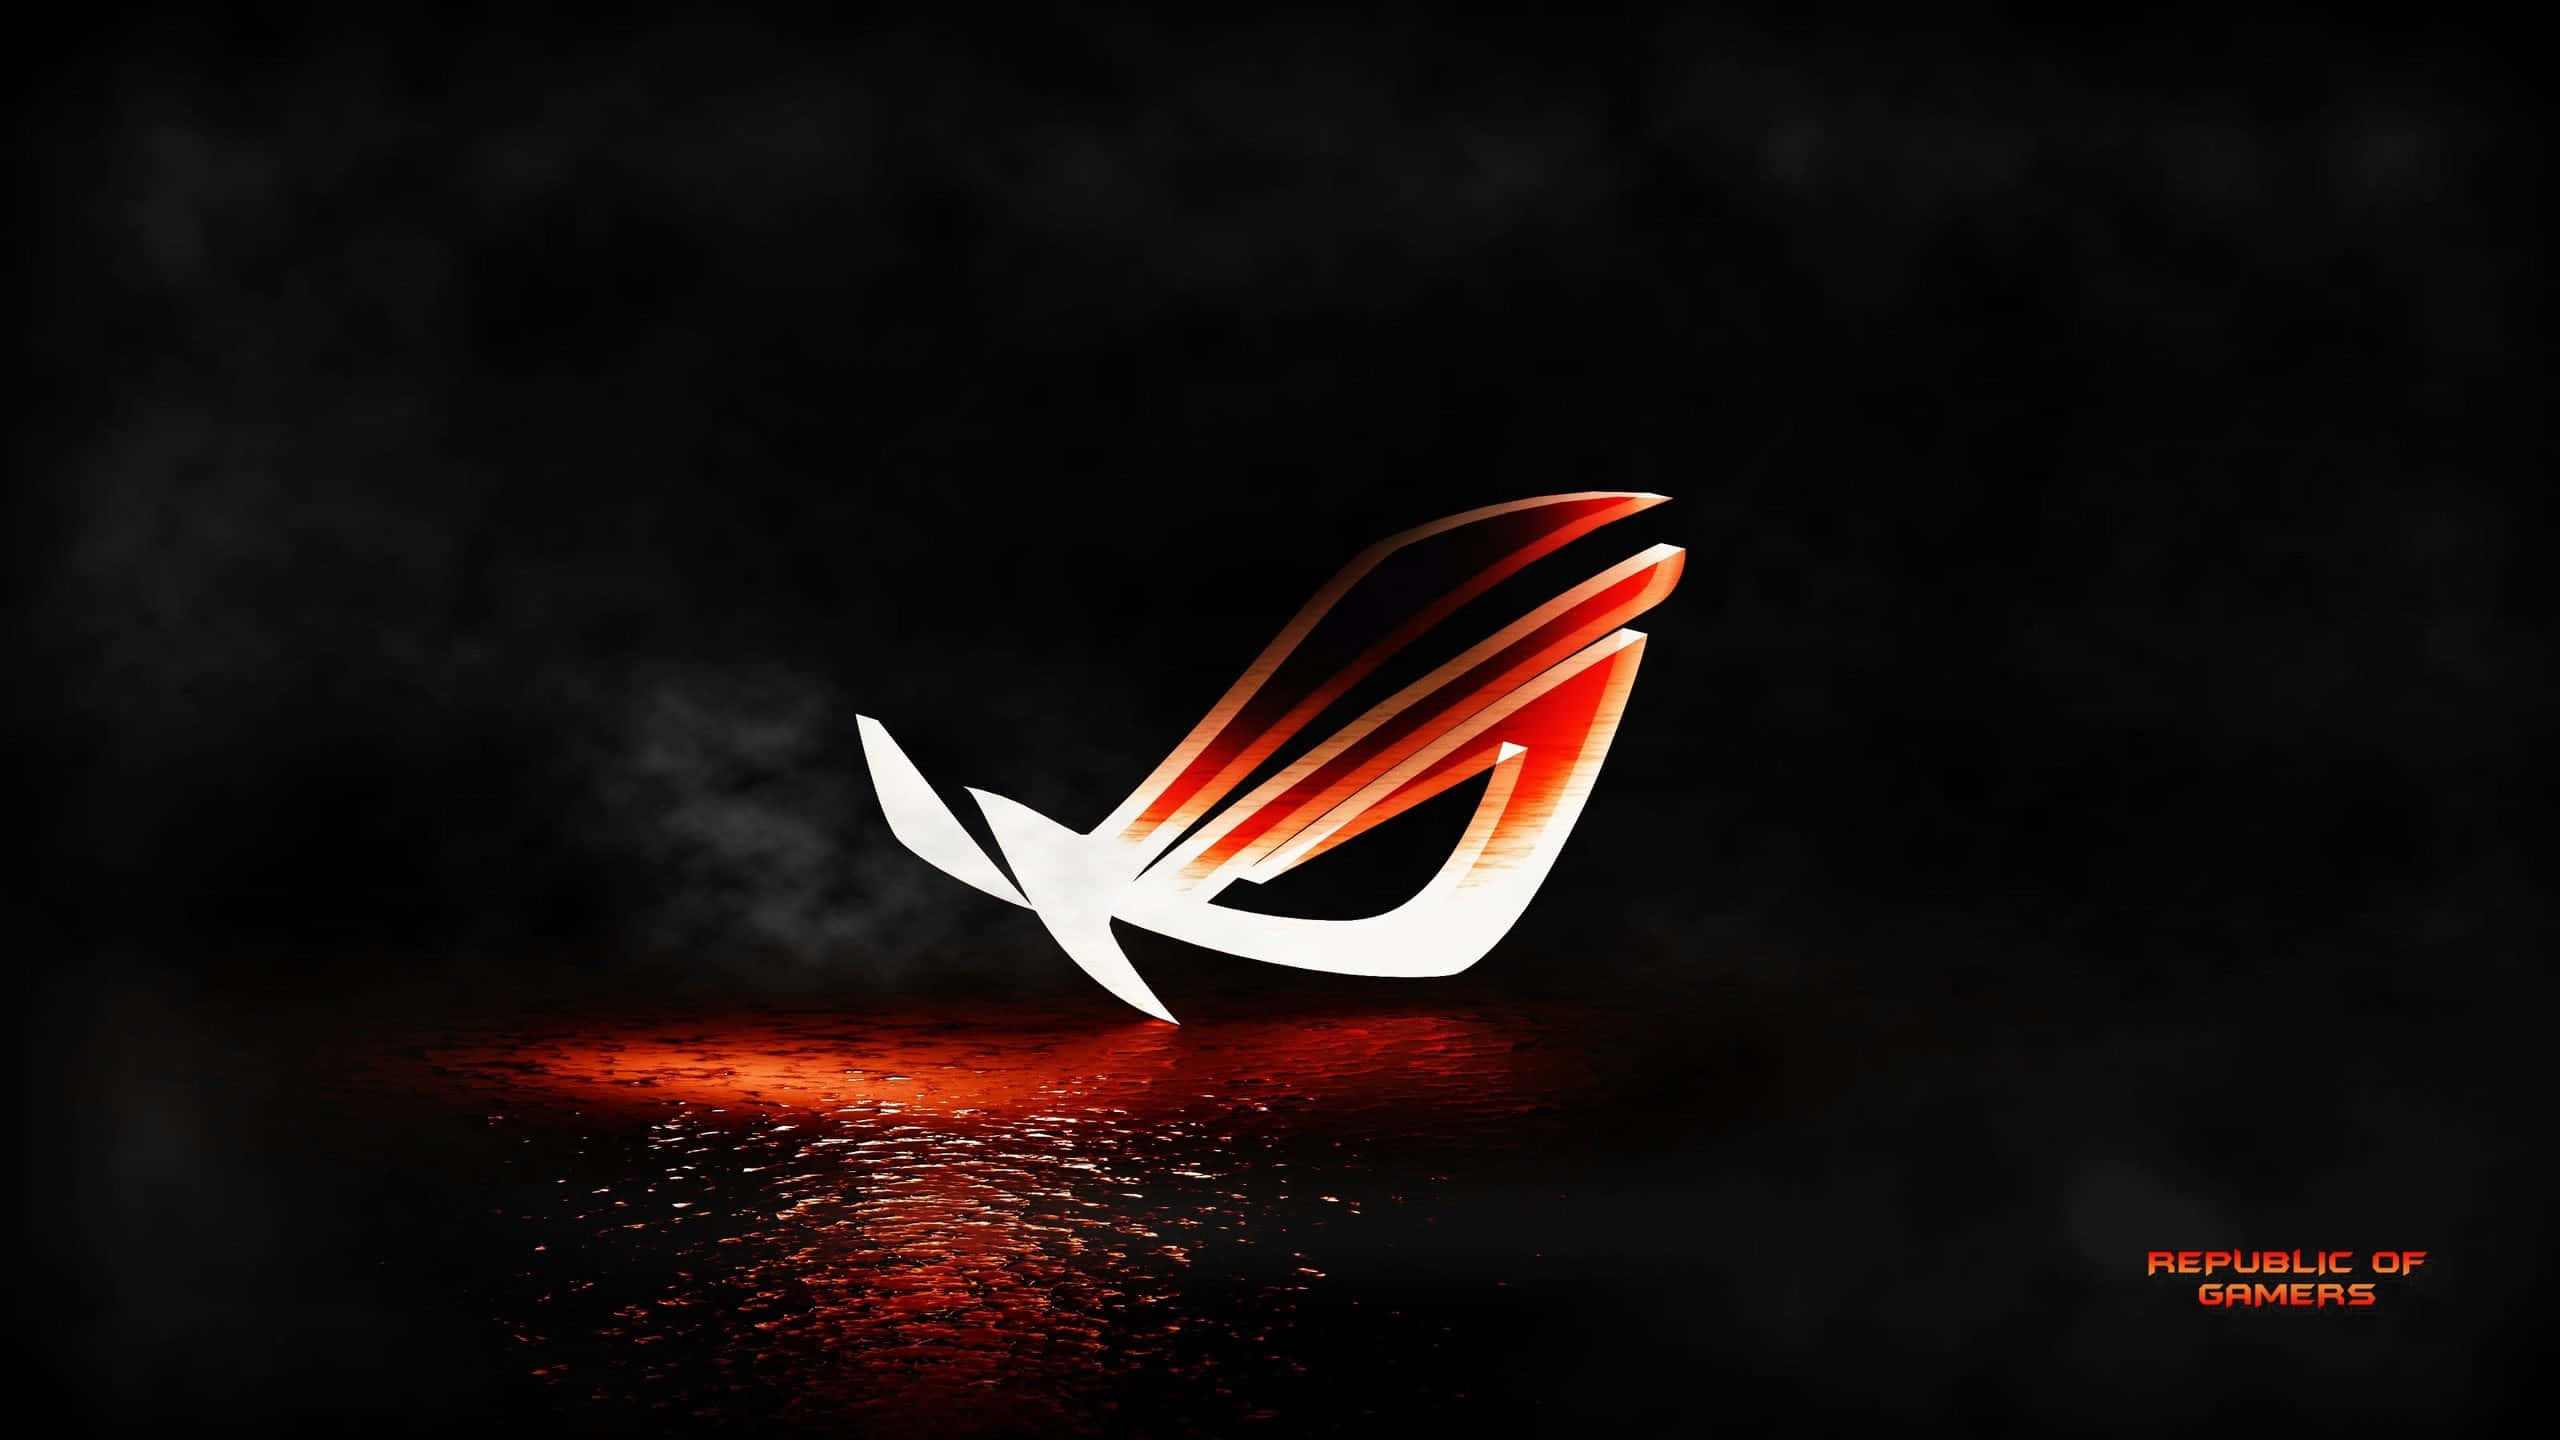 "Unlock limitless gaming performance with ROG."